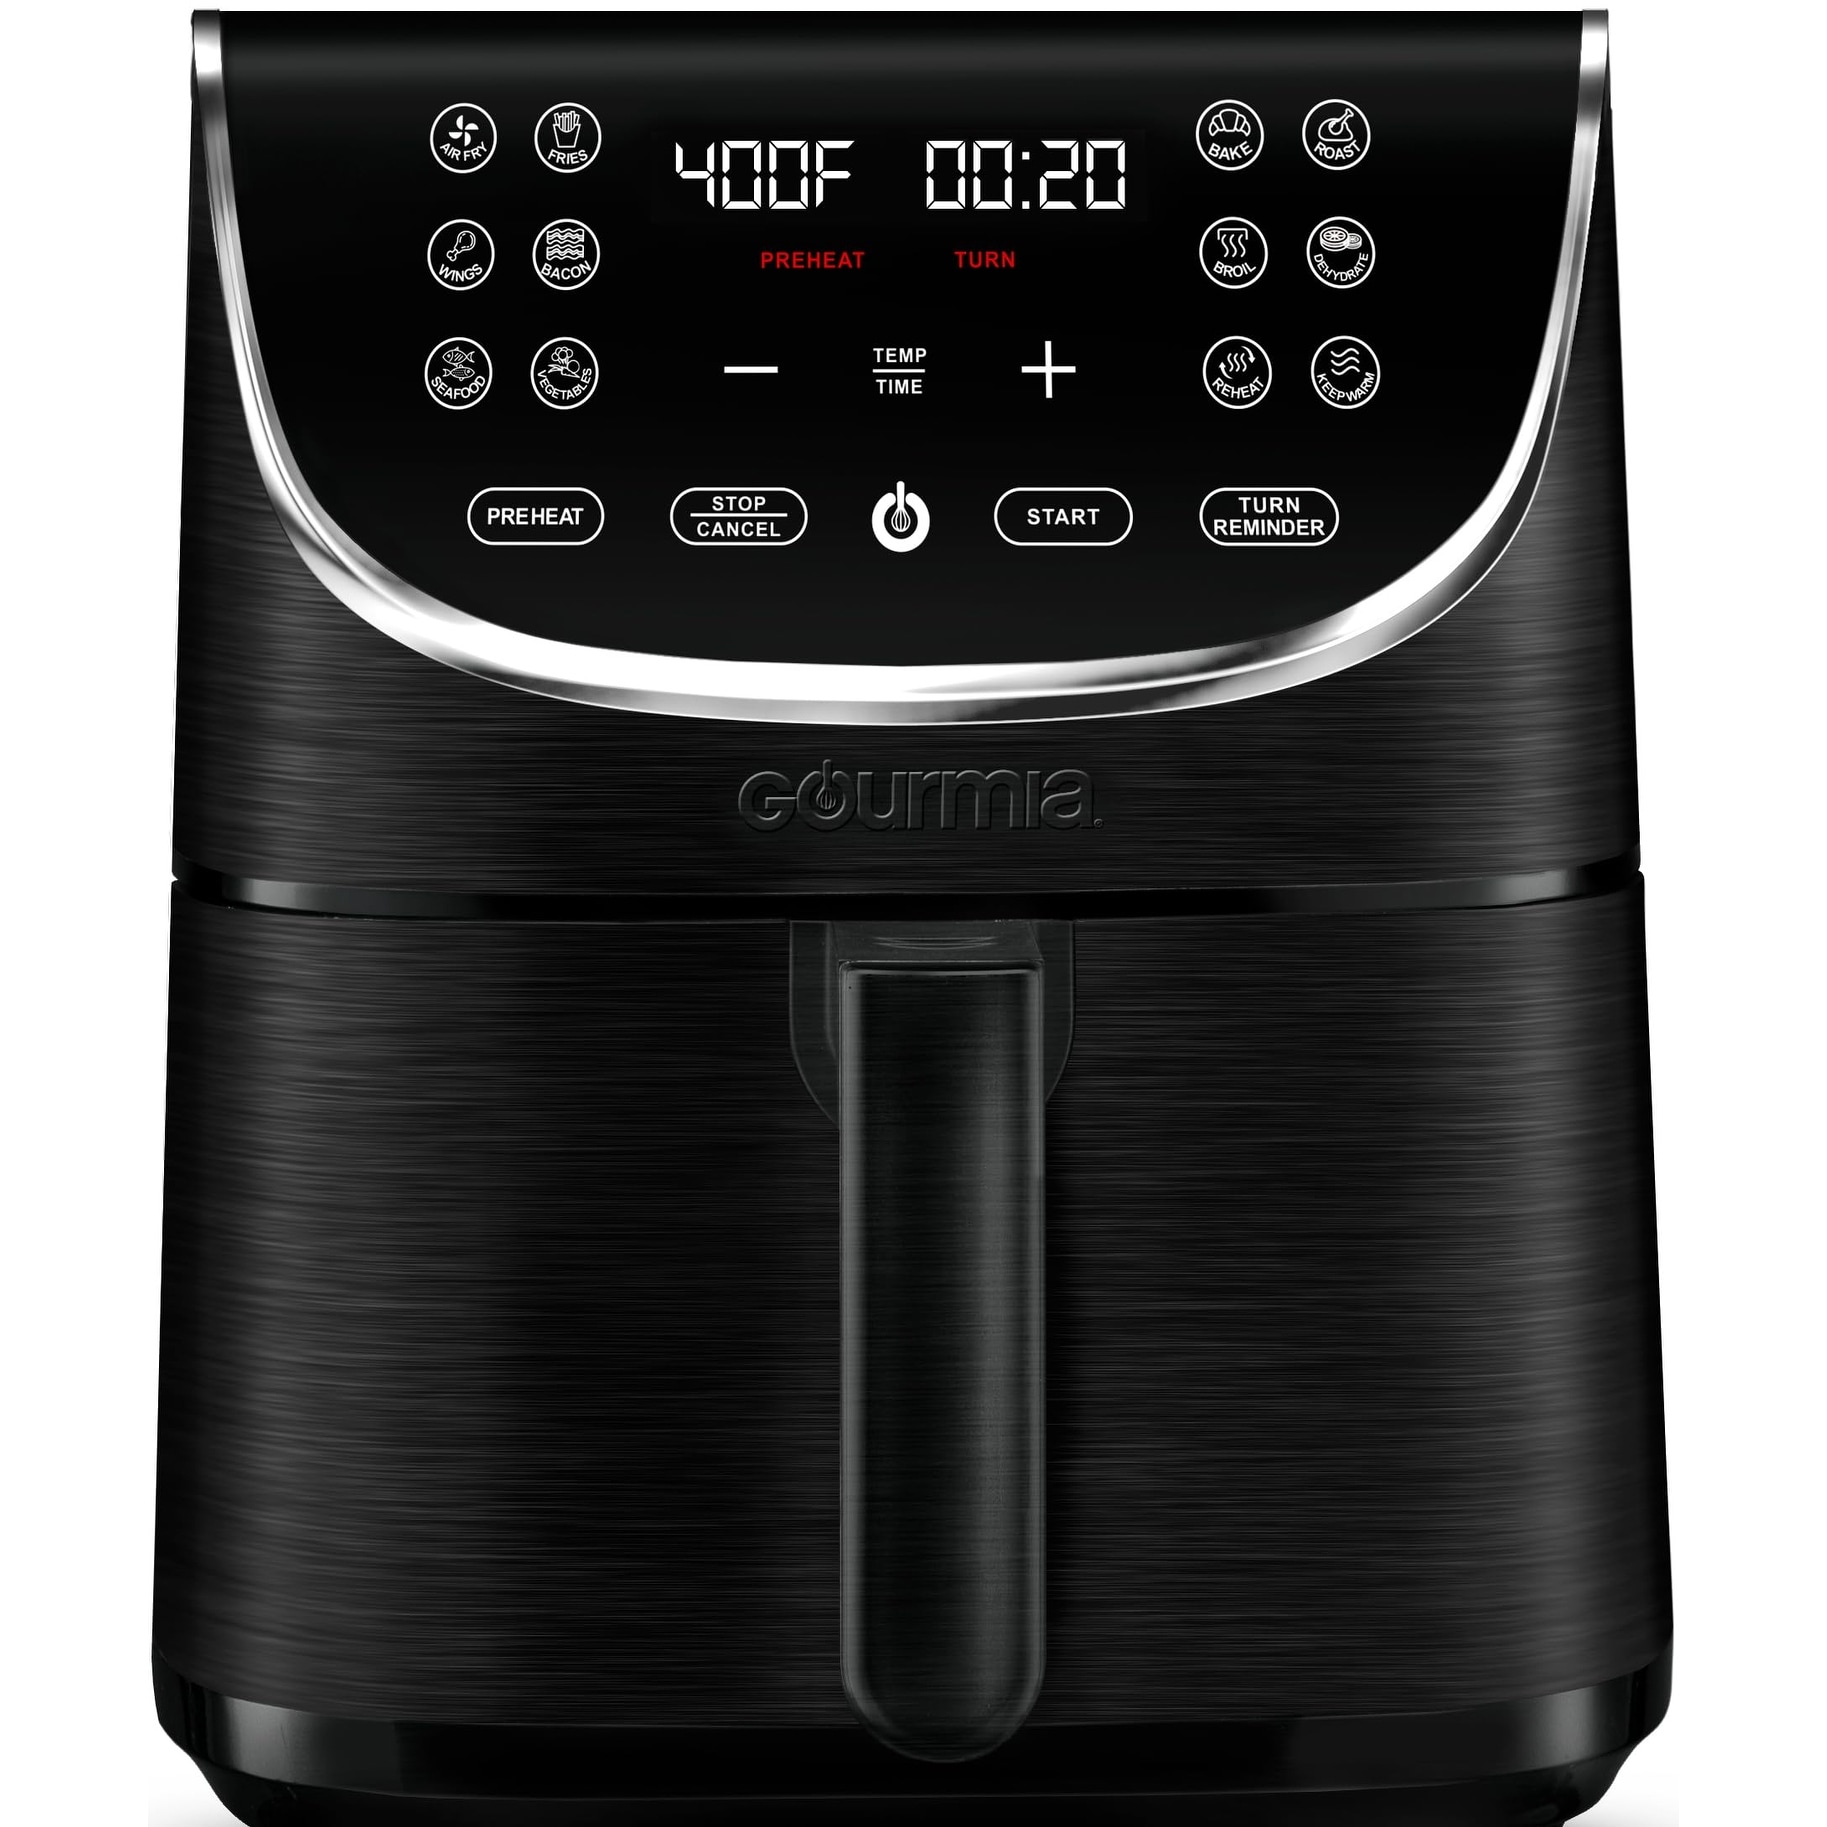 s bestselling air fryer and toaster oven combo: Cosori 12